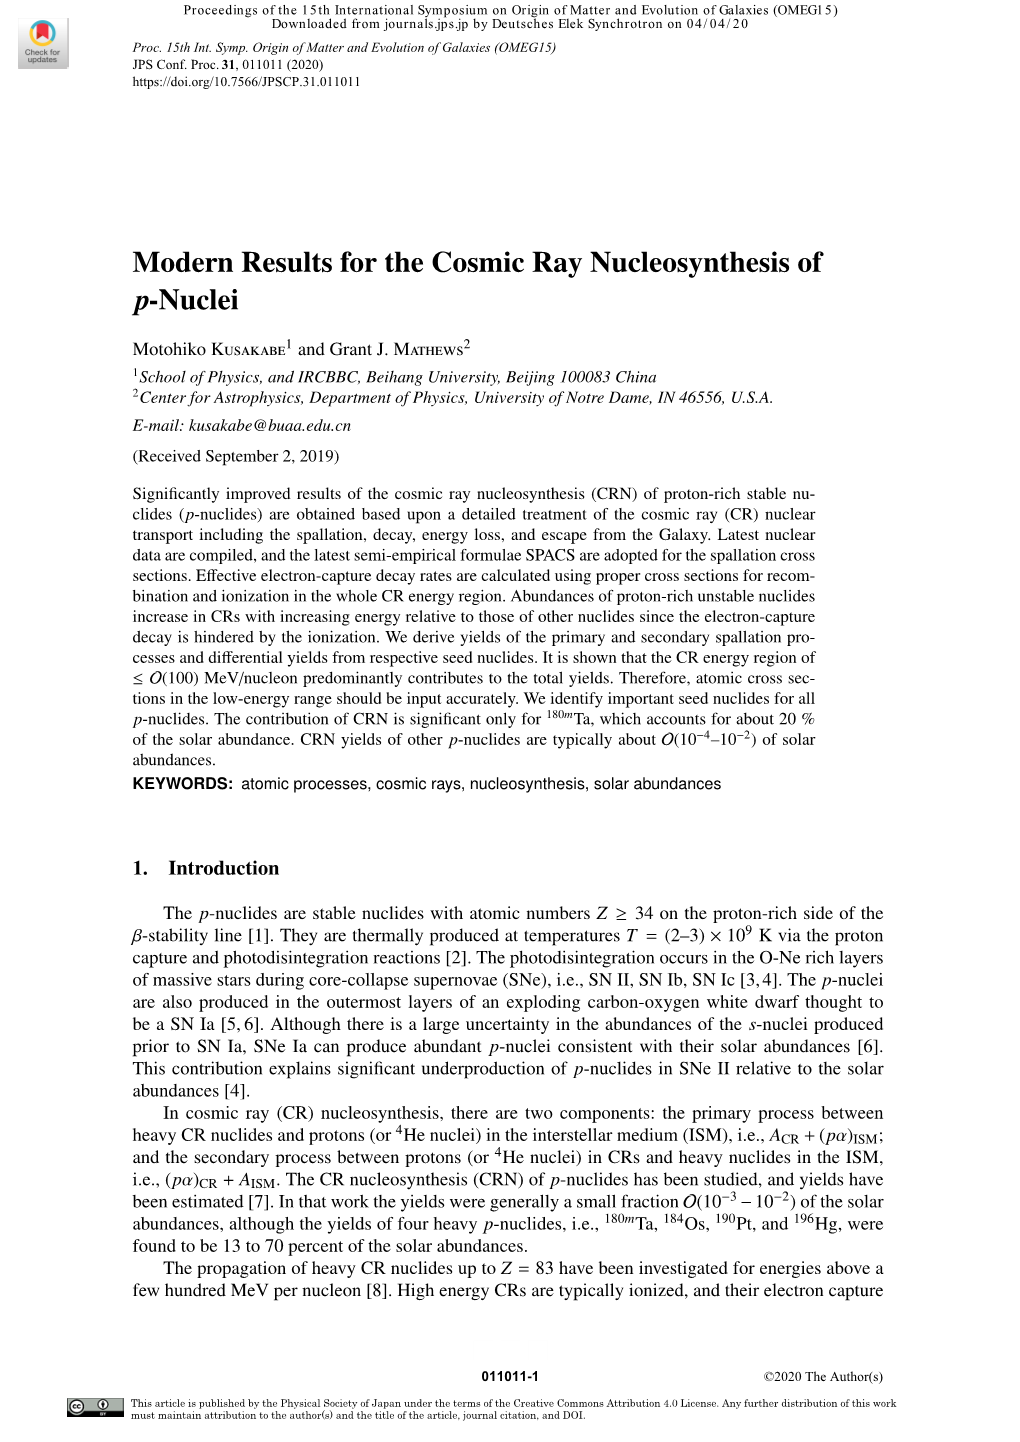 Modern Results for the Cosmic Ray Nucleosynthesis of P-Nuclei